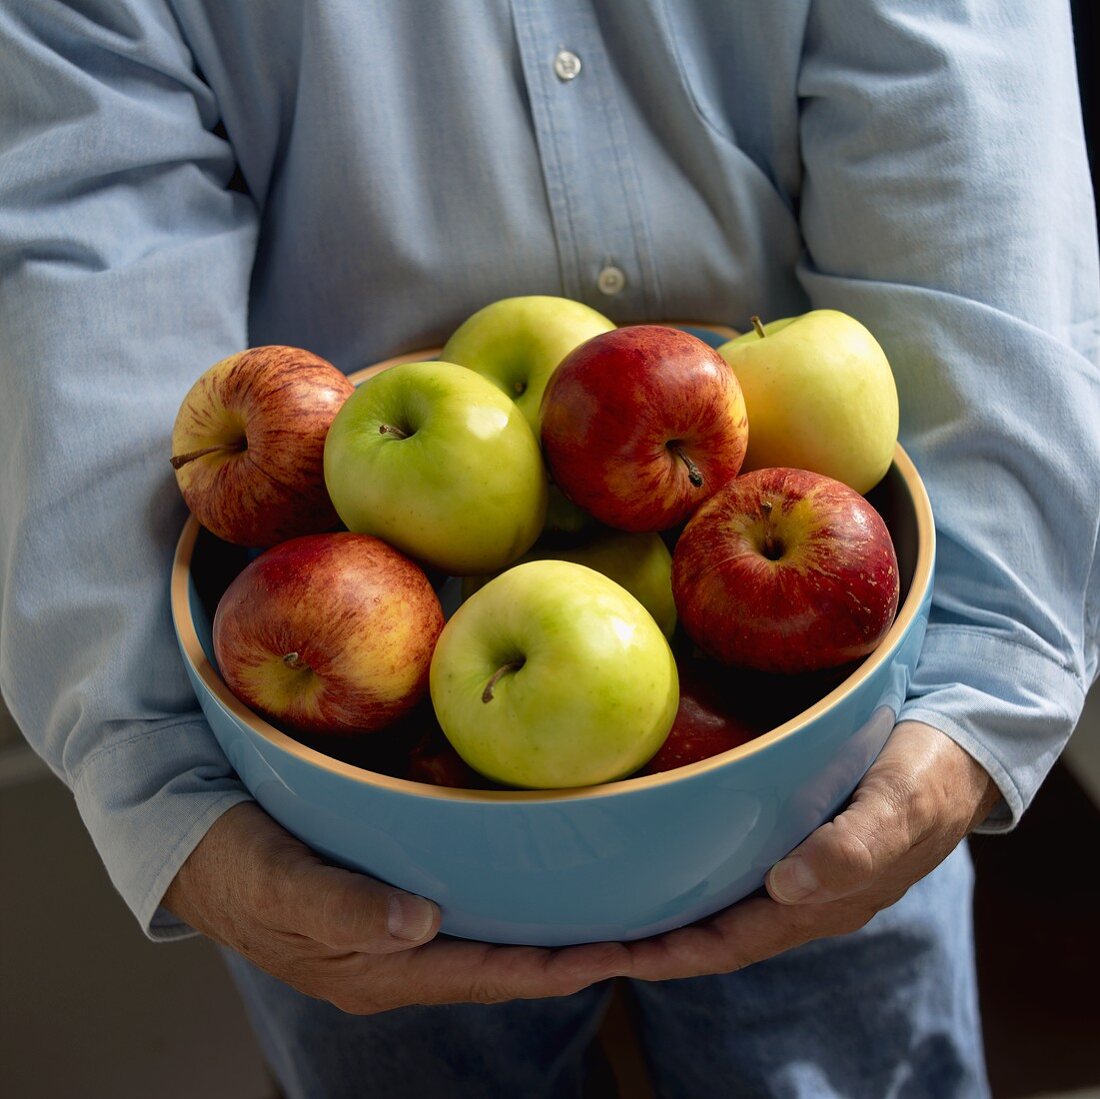 Man Holding a Bowl of Red and Green Apples